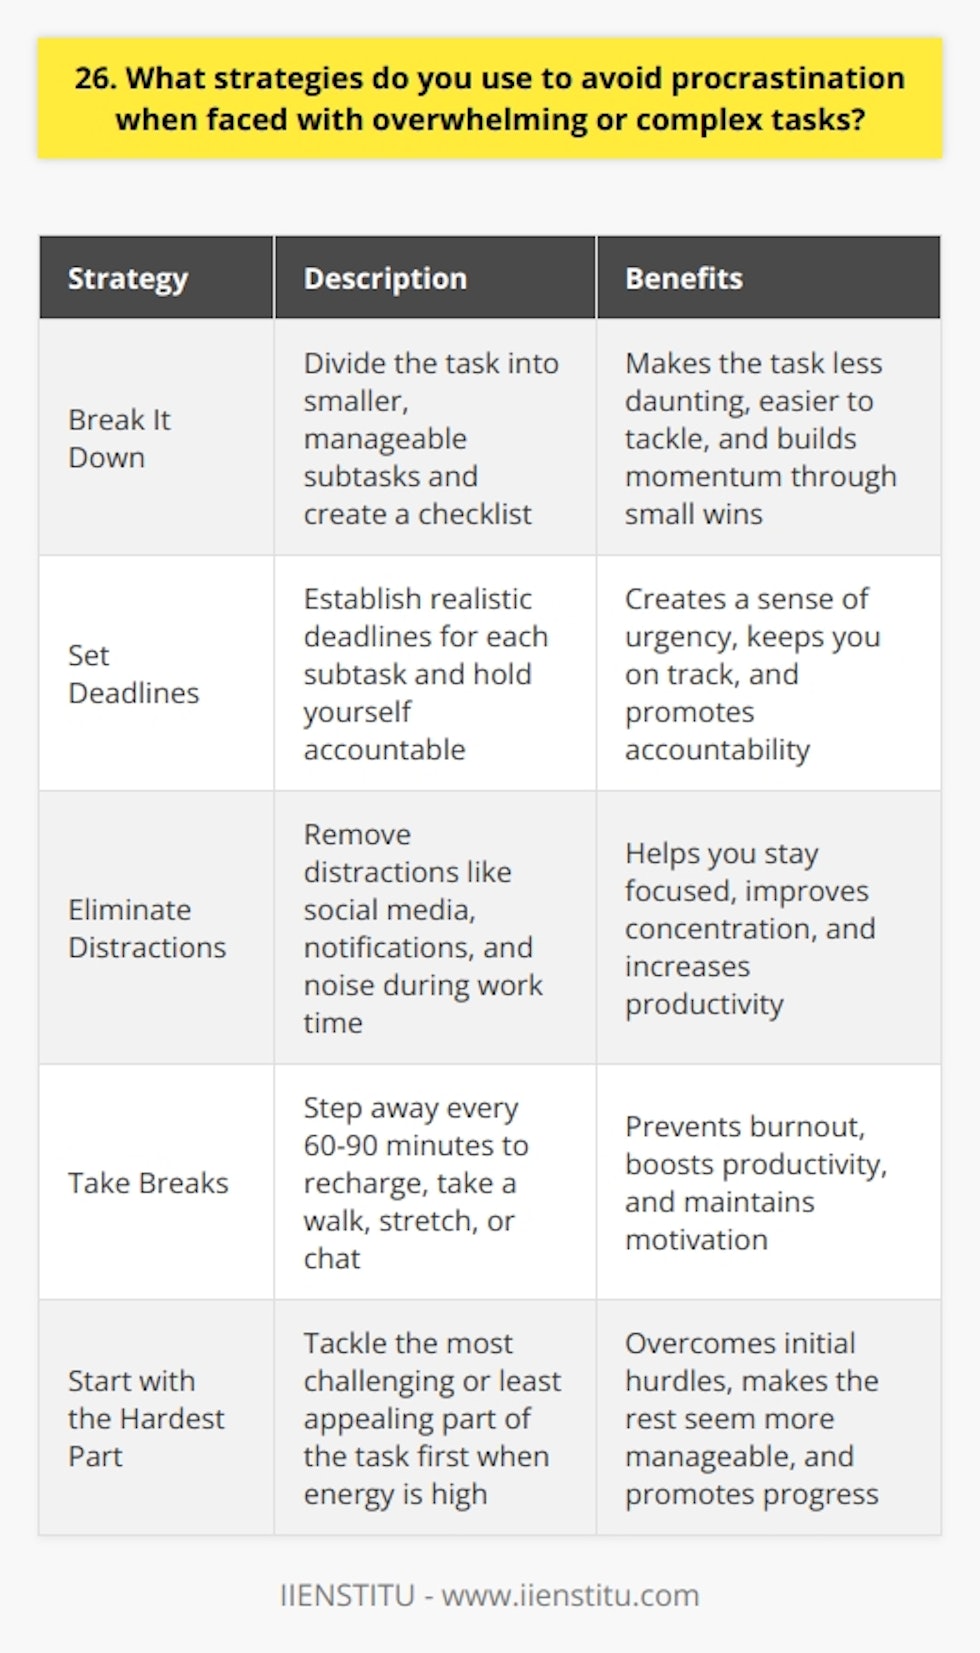 When faced with overwhelming or complex tasks, I employ several strategies to avoid procrastination and stay productive. Break It Down First, I break the task into smaller, manageable chunks. This makes it less daunting and easier to tackle. I create a checklist of subtasks and focus on completing one at a time. Small wins build momentum. Set Deadlines Next, I set realistic deadlines for each subtask. This creates a sense of urgency and keeps me on track. I hold myself accountable by sharing my deadlines with colleagues or using a task management app for reminders. Eliminate Distractions To stay focused, I eliminate distractions like social media, email notifications, and chatty coworkers during dedicated work time. I put on noise-canceling headphones, play instrumental music, and find a quiet workspace to help me concentrate better. Take Breaks Surprisingly, taking regular breaks actually boosts my productivity. I step away every 60-90 minutes to recharge. During breaks, I take a quick walk, do stretches, or chat with a colleague. This prevents burnout. Start with the Hardest Part Lastly, I tackle the hardest or least appealing part of the task first when my energy is highest. Once I get over that initial hurdle, the rest seems more manageable. Progress motivates me to keep going. By employing these anti-procrastination strategies, Im able to stay organized, motivated, and productive, even when facing complex projects.